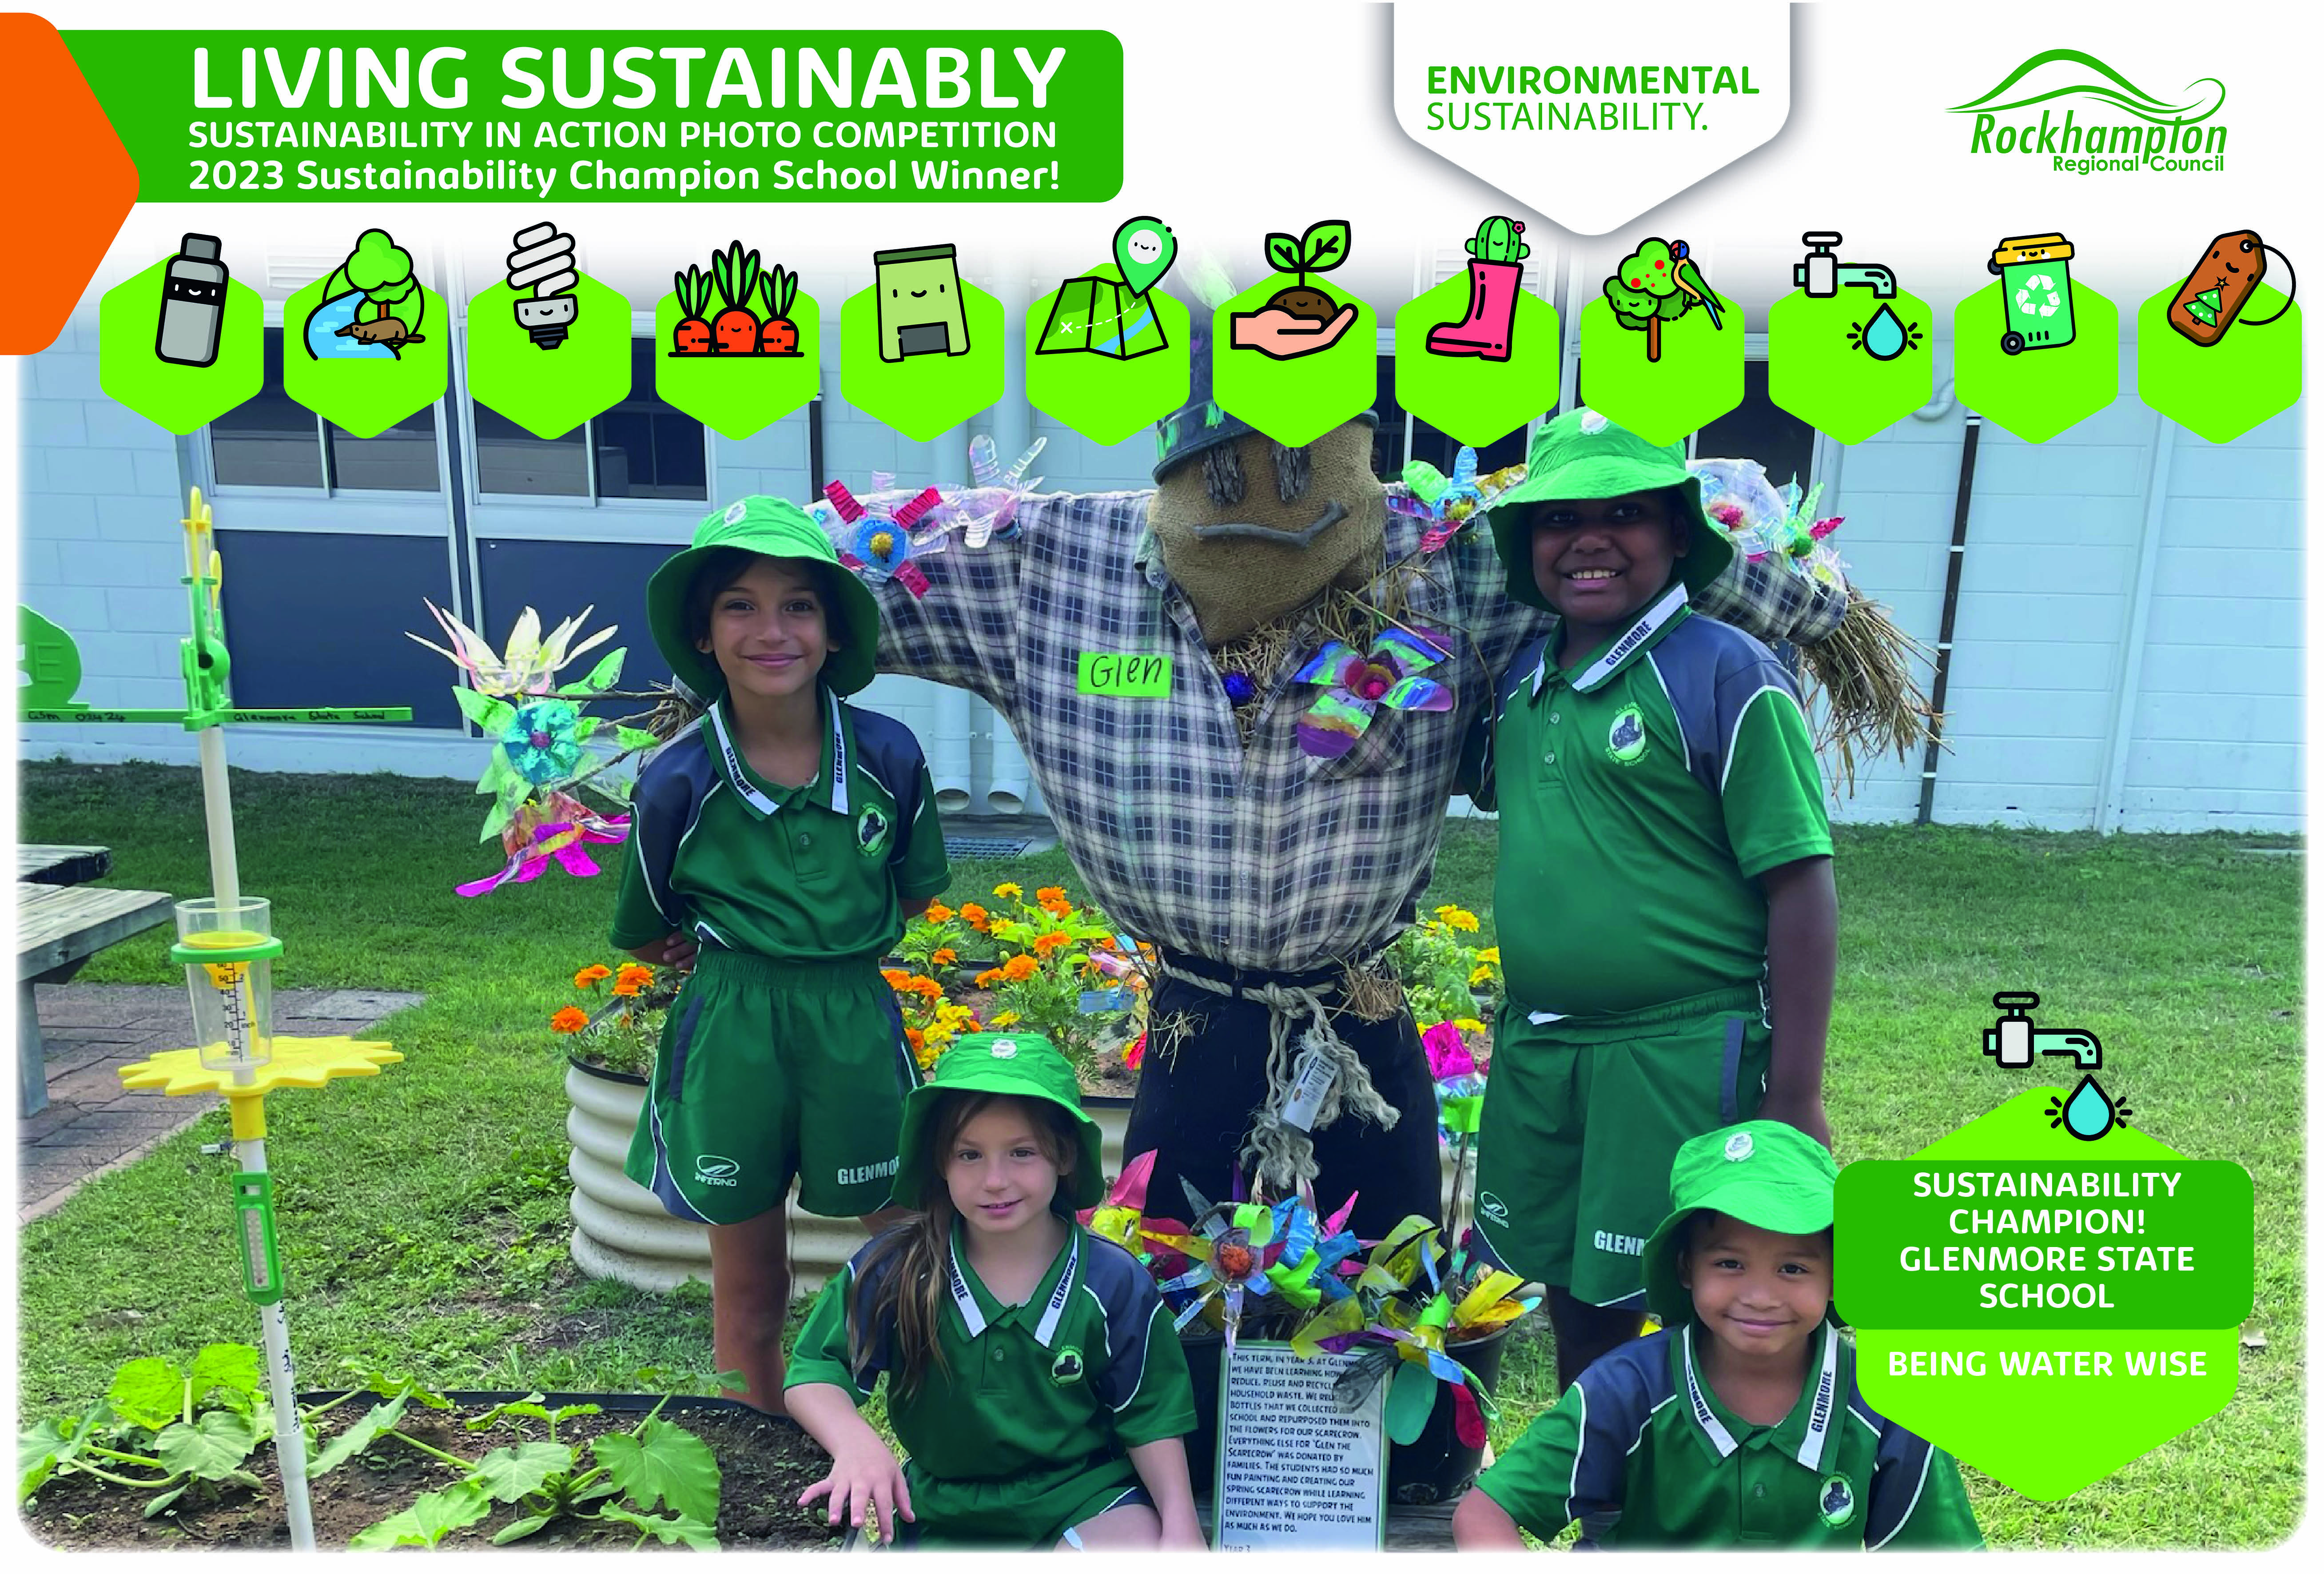 2023-SCHOOL-Sustainability-in-Action-Photo-Comp-Glenmore-State-School